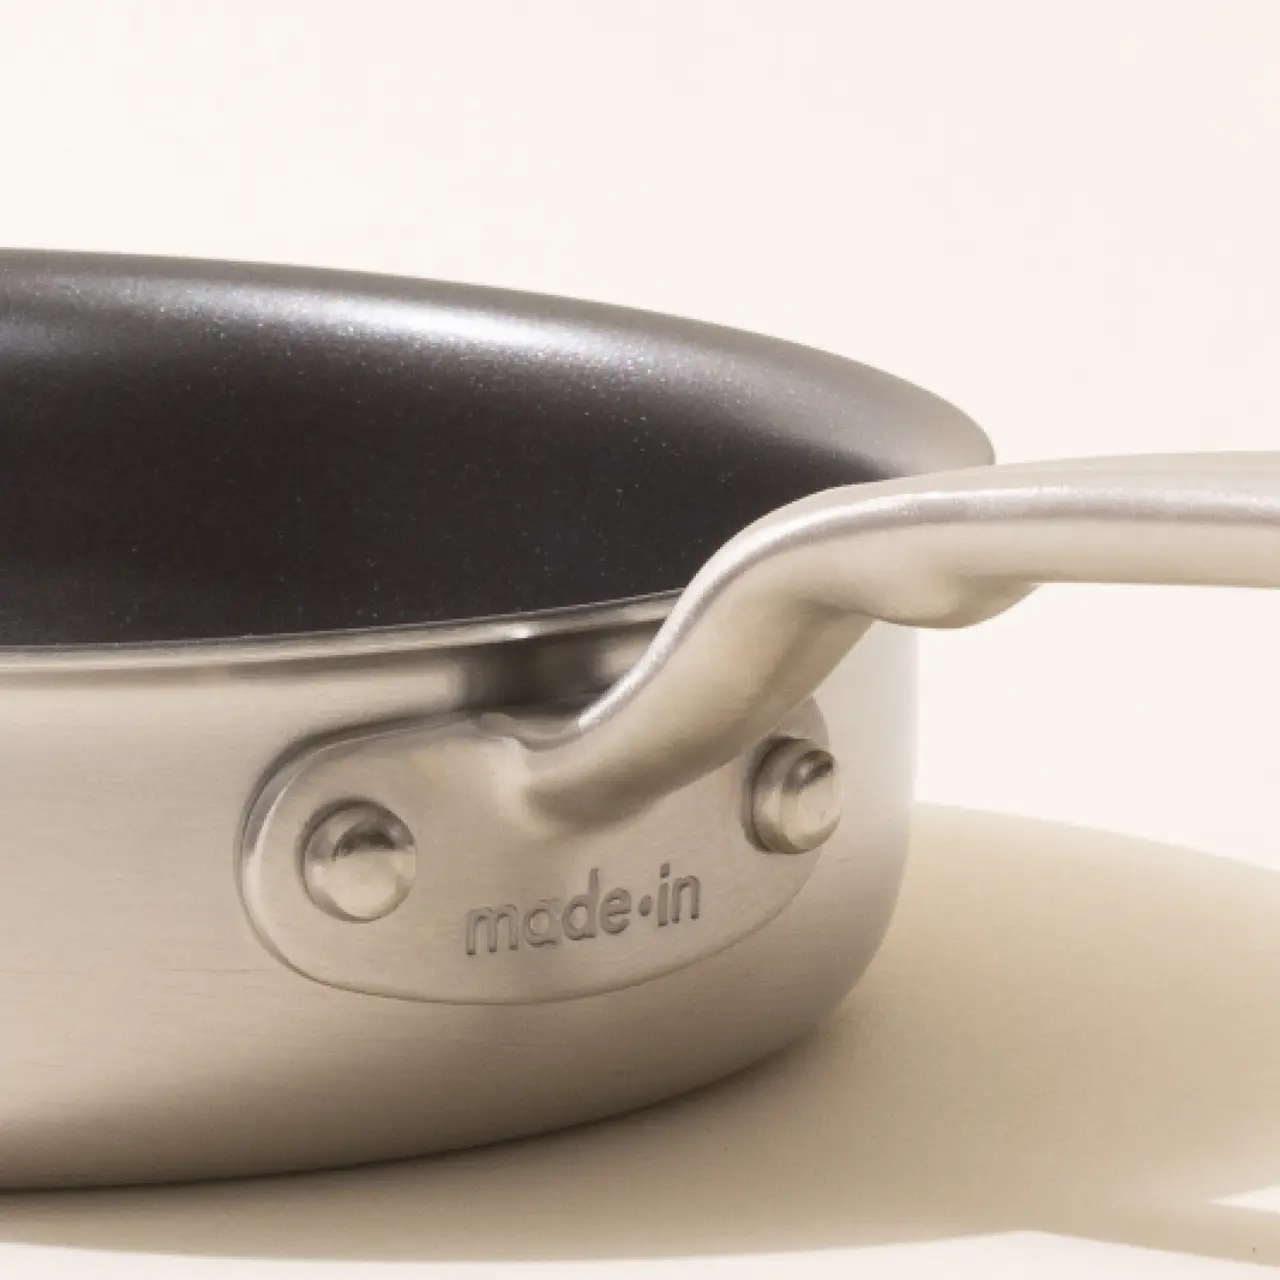 A close-up of a stainless steel saucepan with a black non-stick coating inside and the word "madein" embossed on the handle.